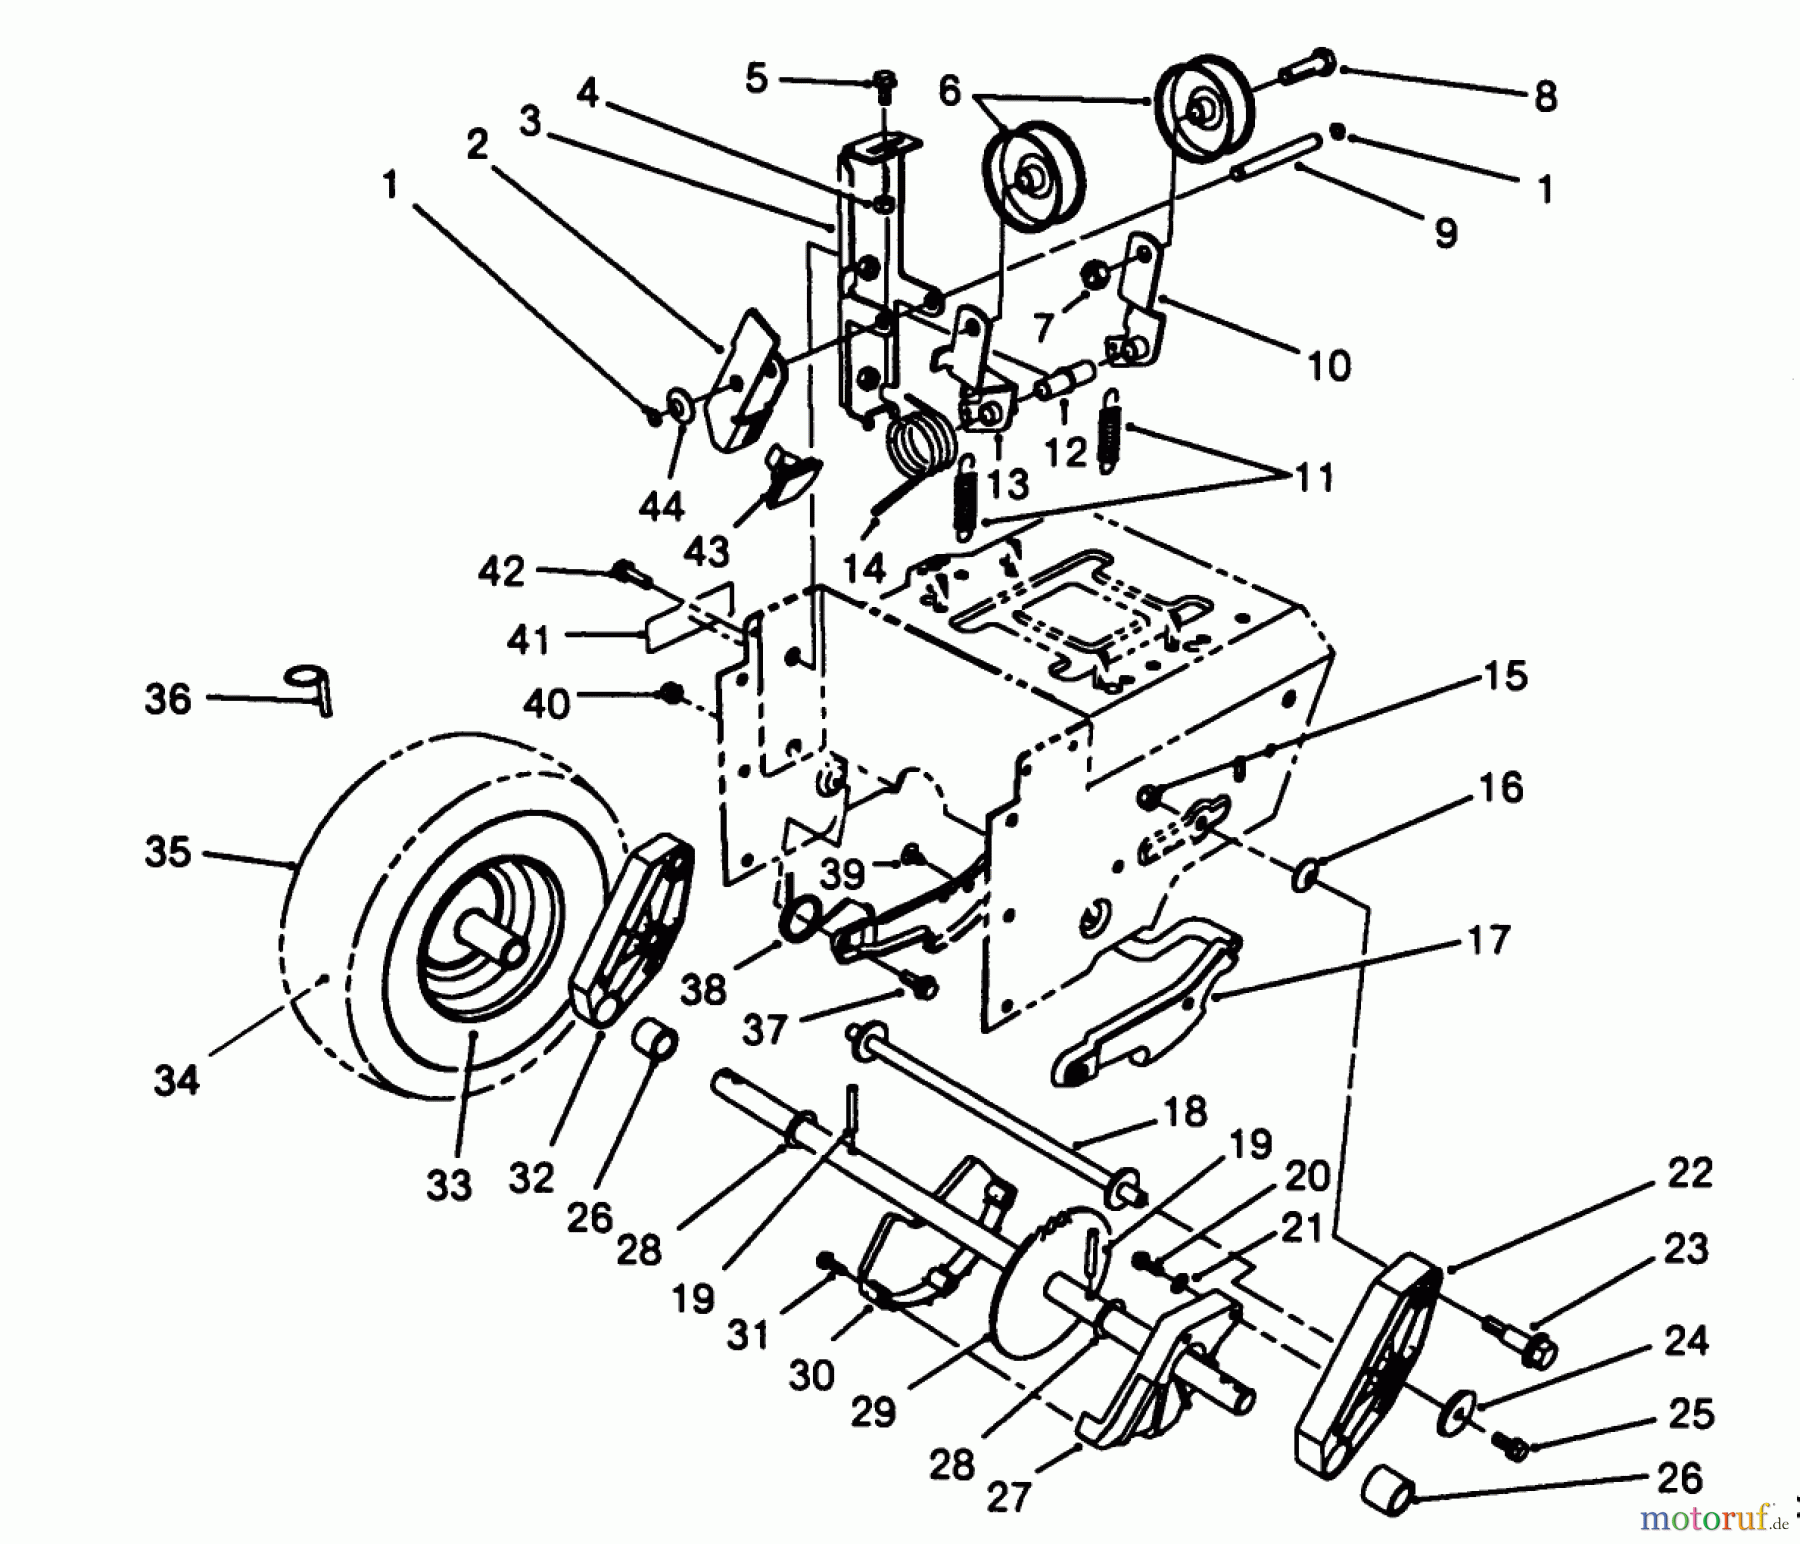  Toro Neu Snow Blowers/Snow Throwers Seite 1 38505 (624) - Toro 624 Power Shift Snowthrower, 1988 (8000001-8999999) TRACTION DRIVE ASSEMBLY